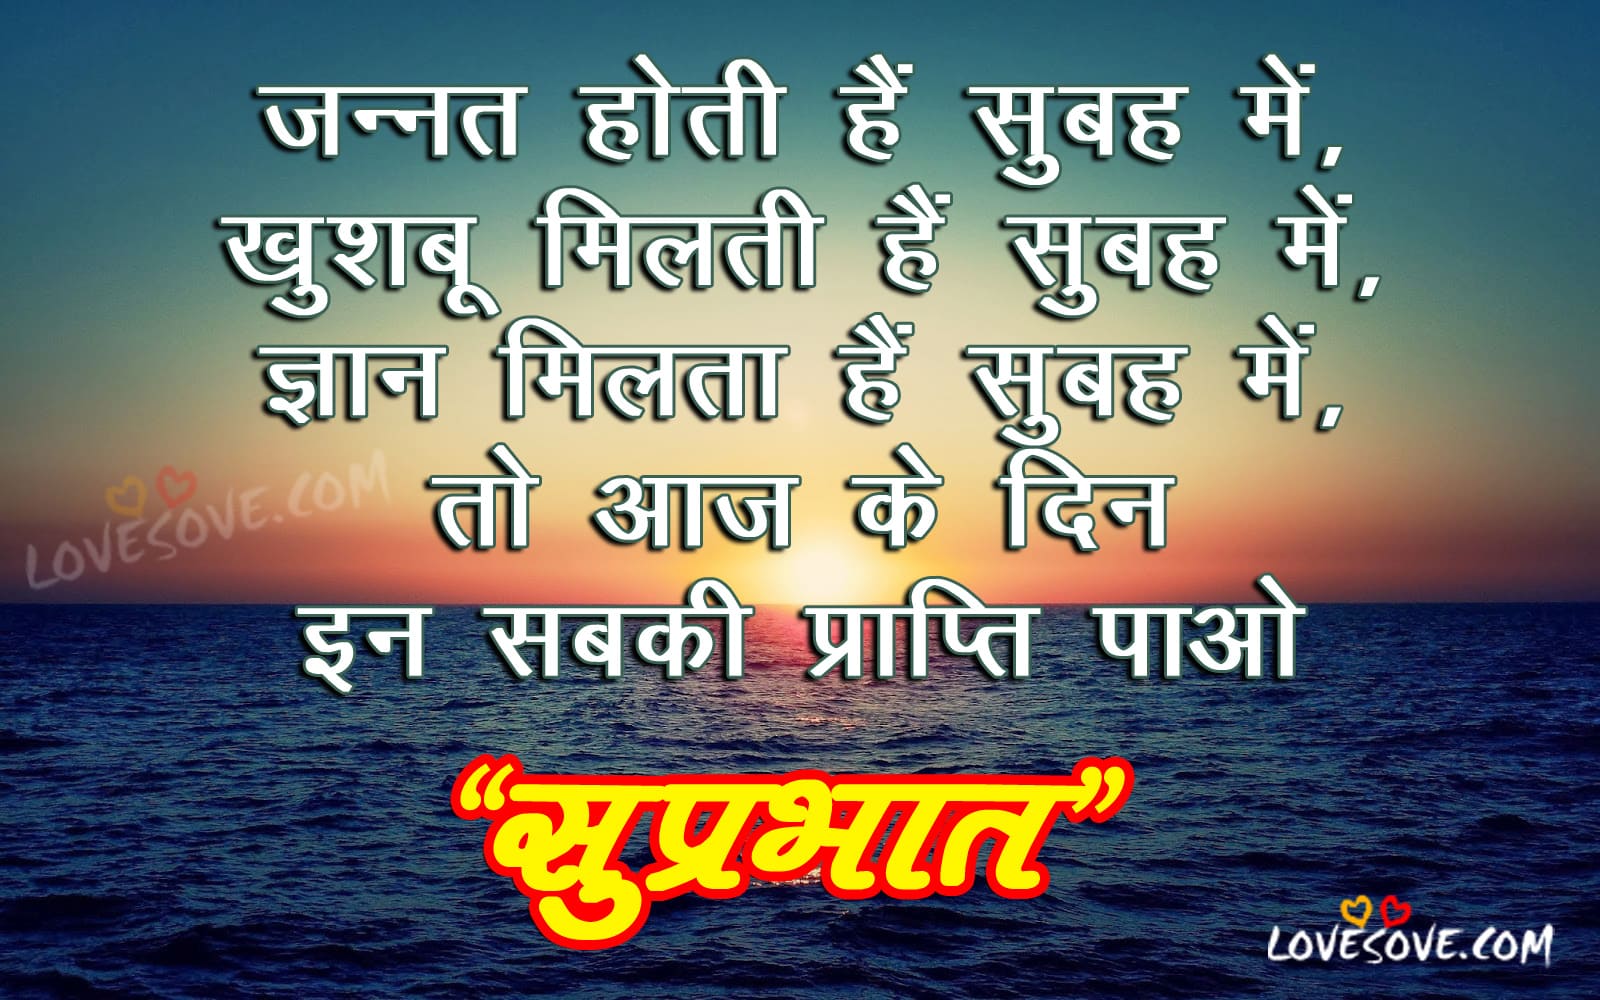 good morning Wishes In Hindi images and Quots lovesove, Images